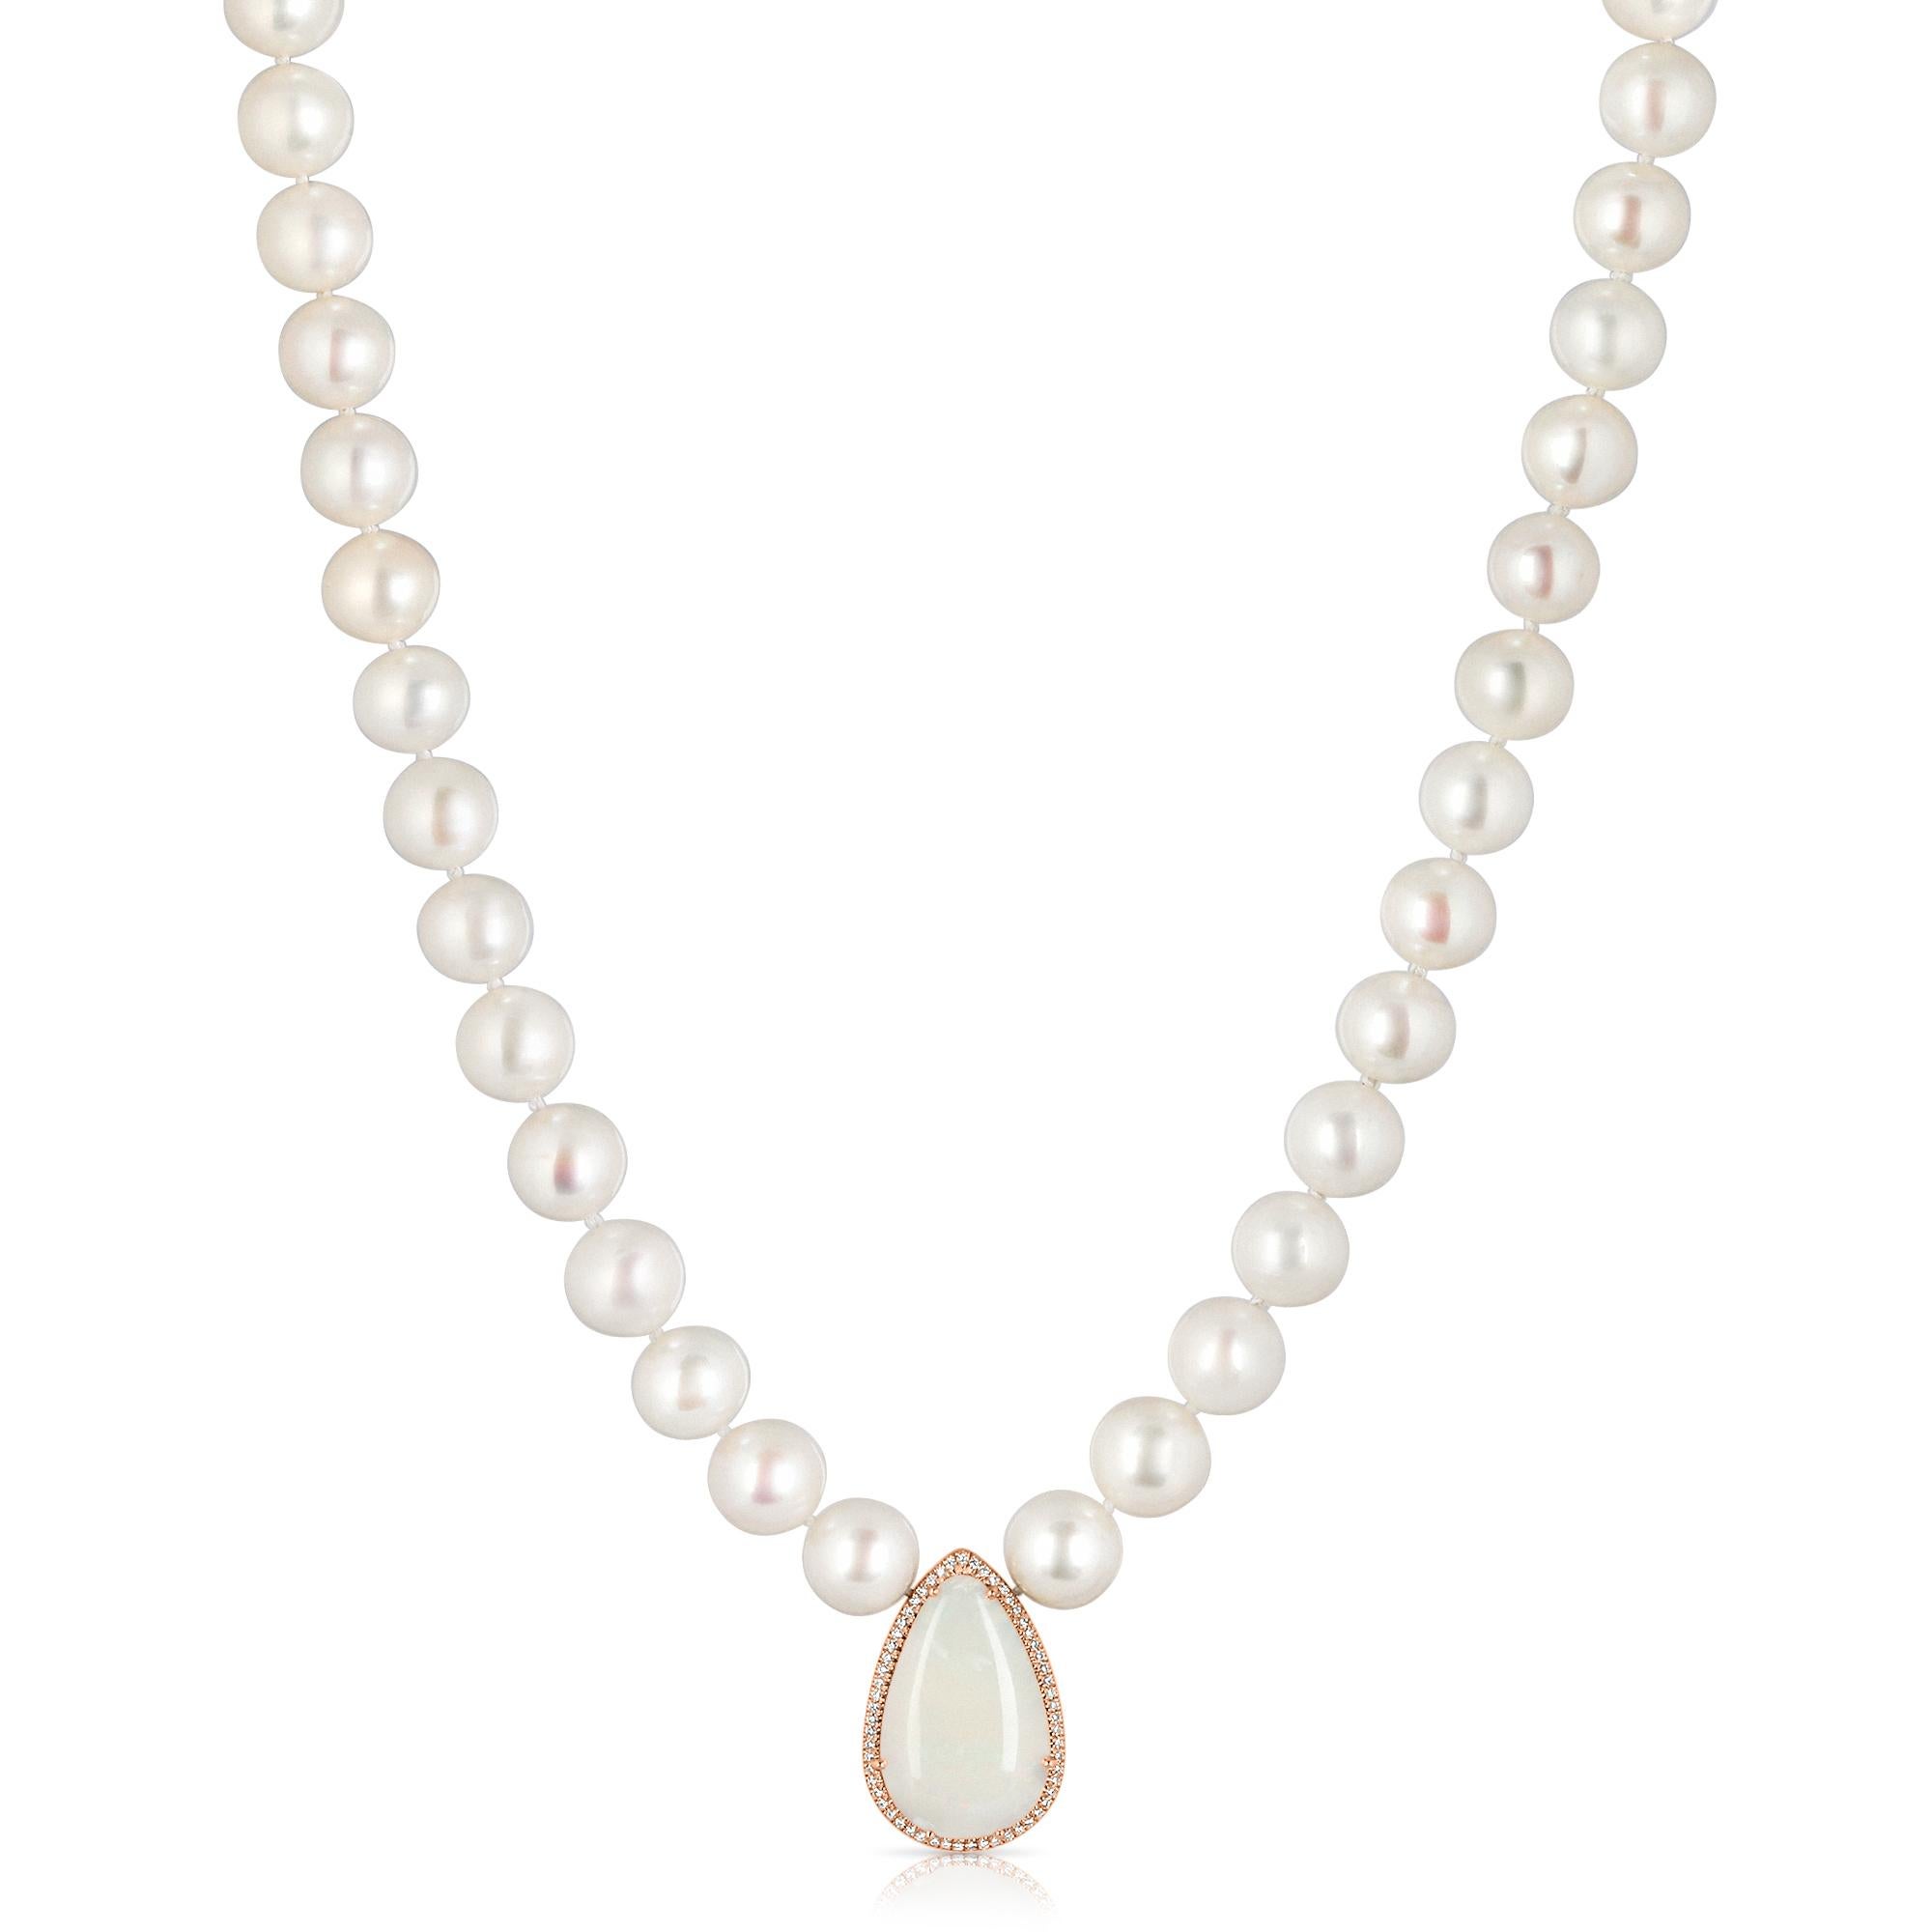 Pear Cut 6.03 Carat Opal And Pearl Necklace For Sale